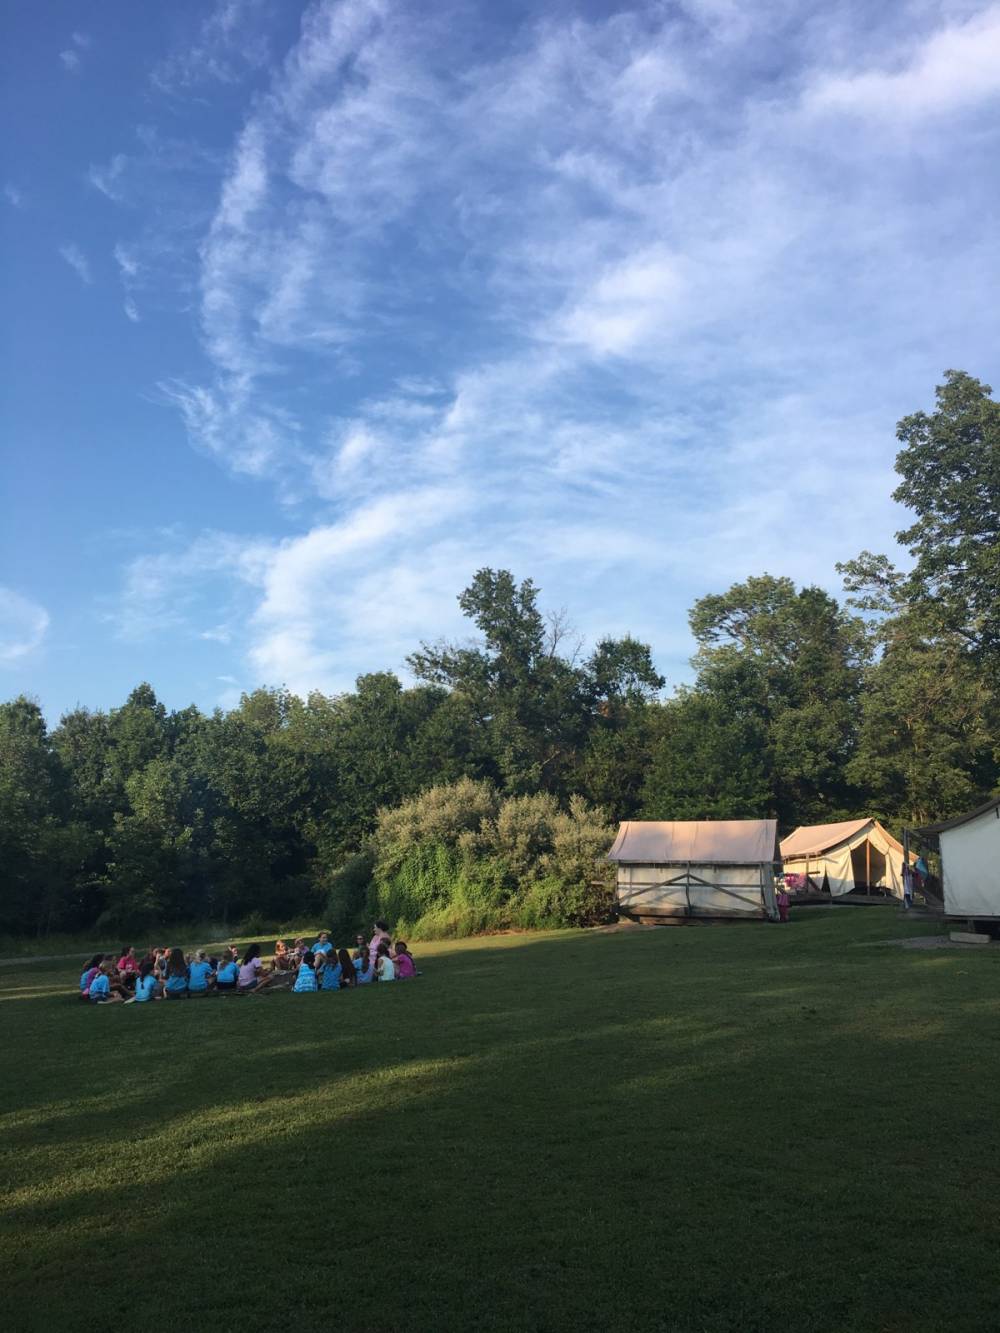 TOP NEW JERSEY SPORTS CAMP: Camp Agnes DeWitt is a Top Sports Summer Camp located in Hillsborough New Jersey offering many fun and enriching Sports and other camp programs. Camp Agnes DeWitt also offers CIT/LIT and/or Teen Leadership Opportunities, too.